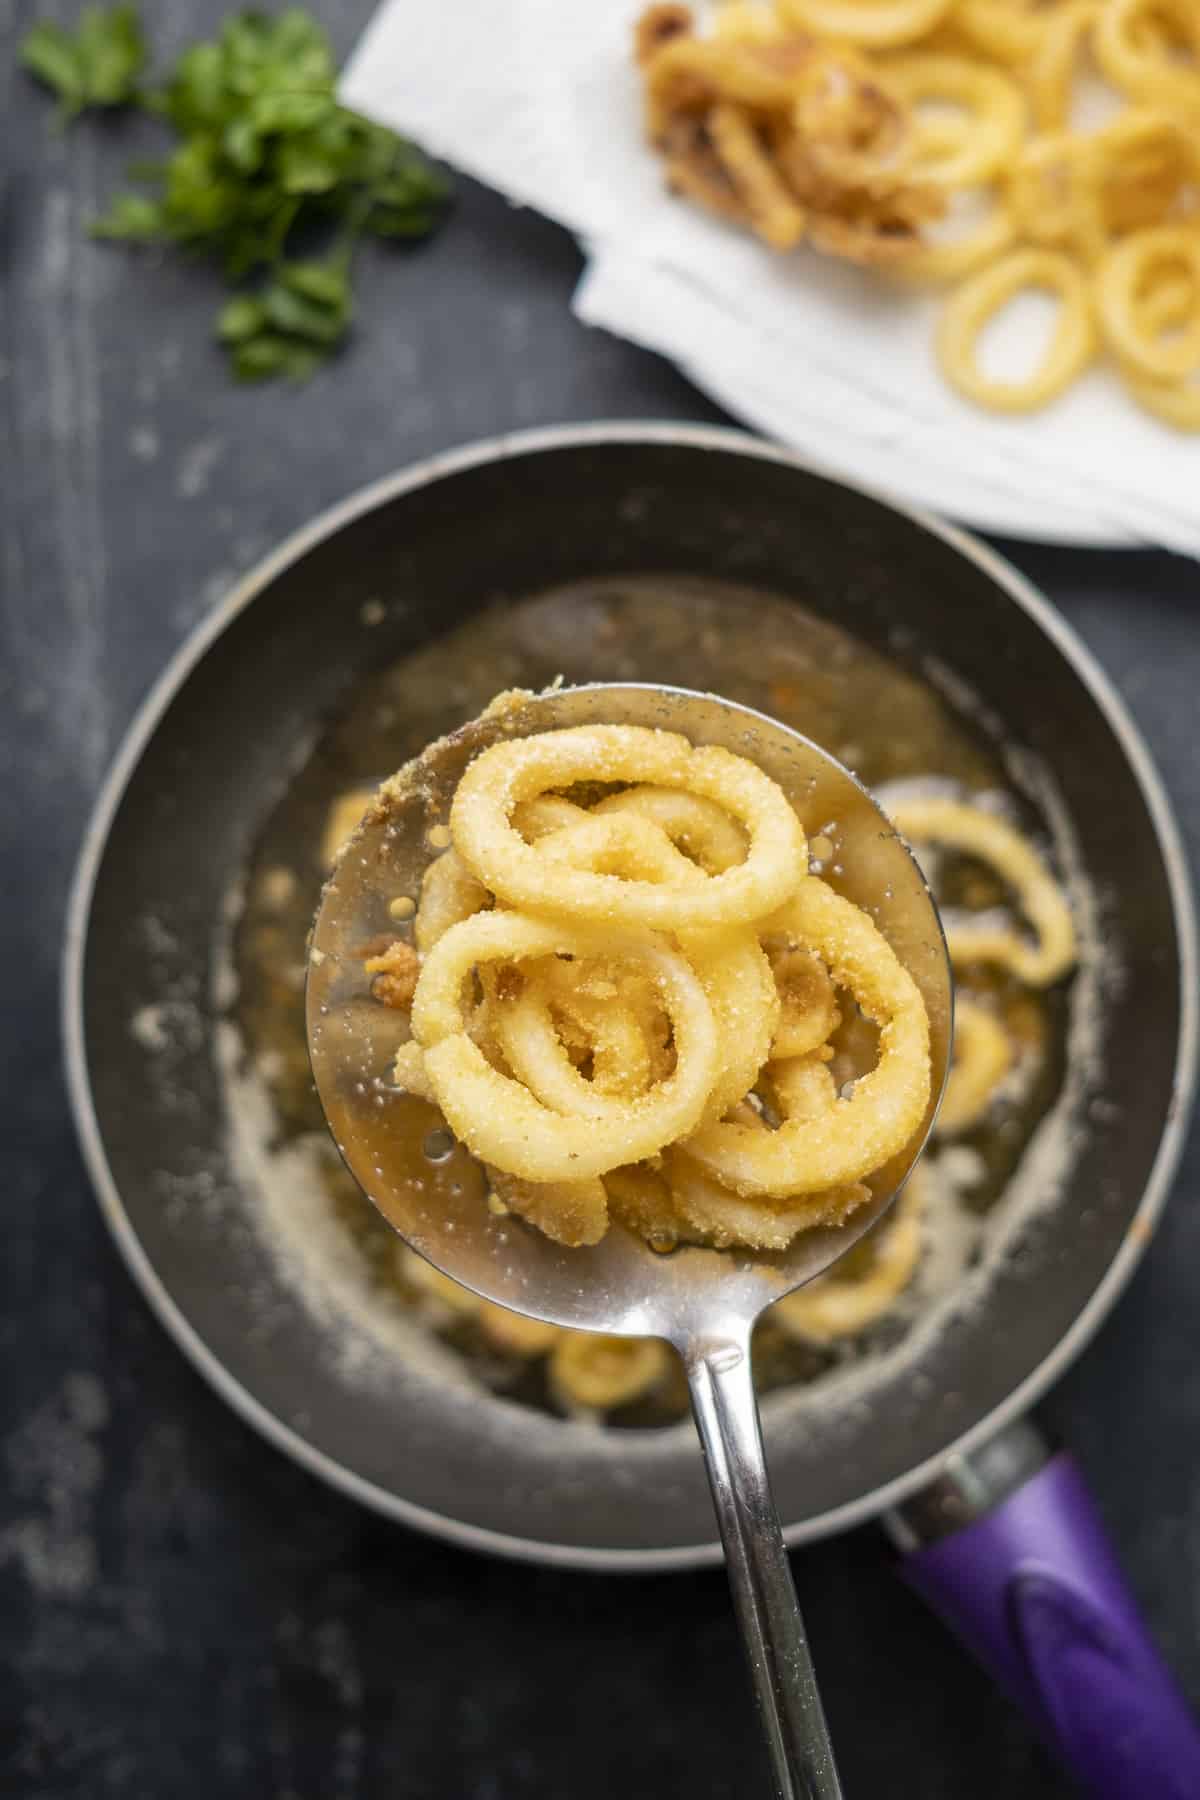 Removing fried calamari rings from hot oil with a slotted spoon.